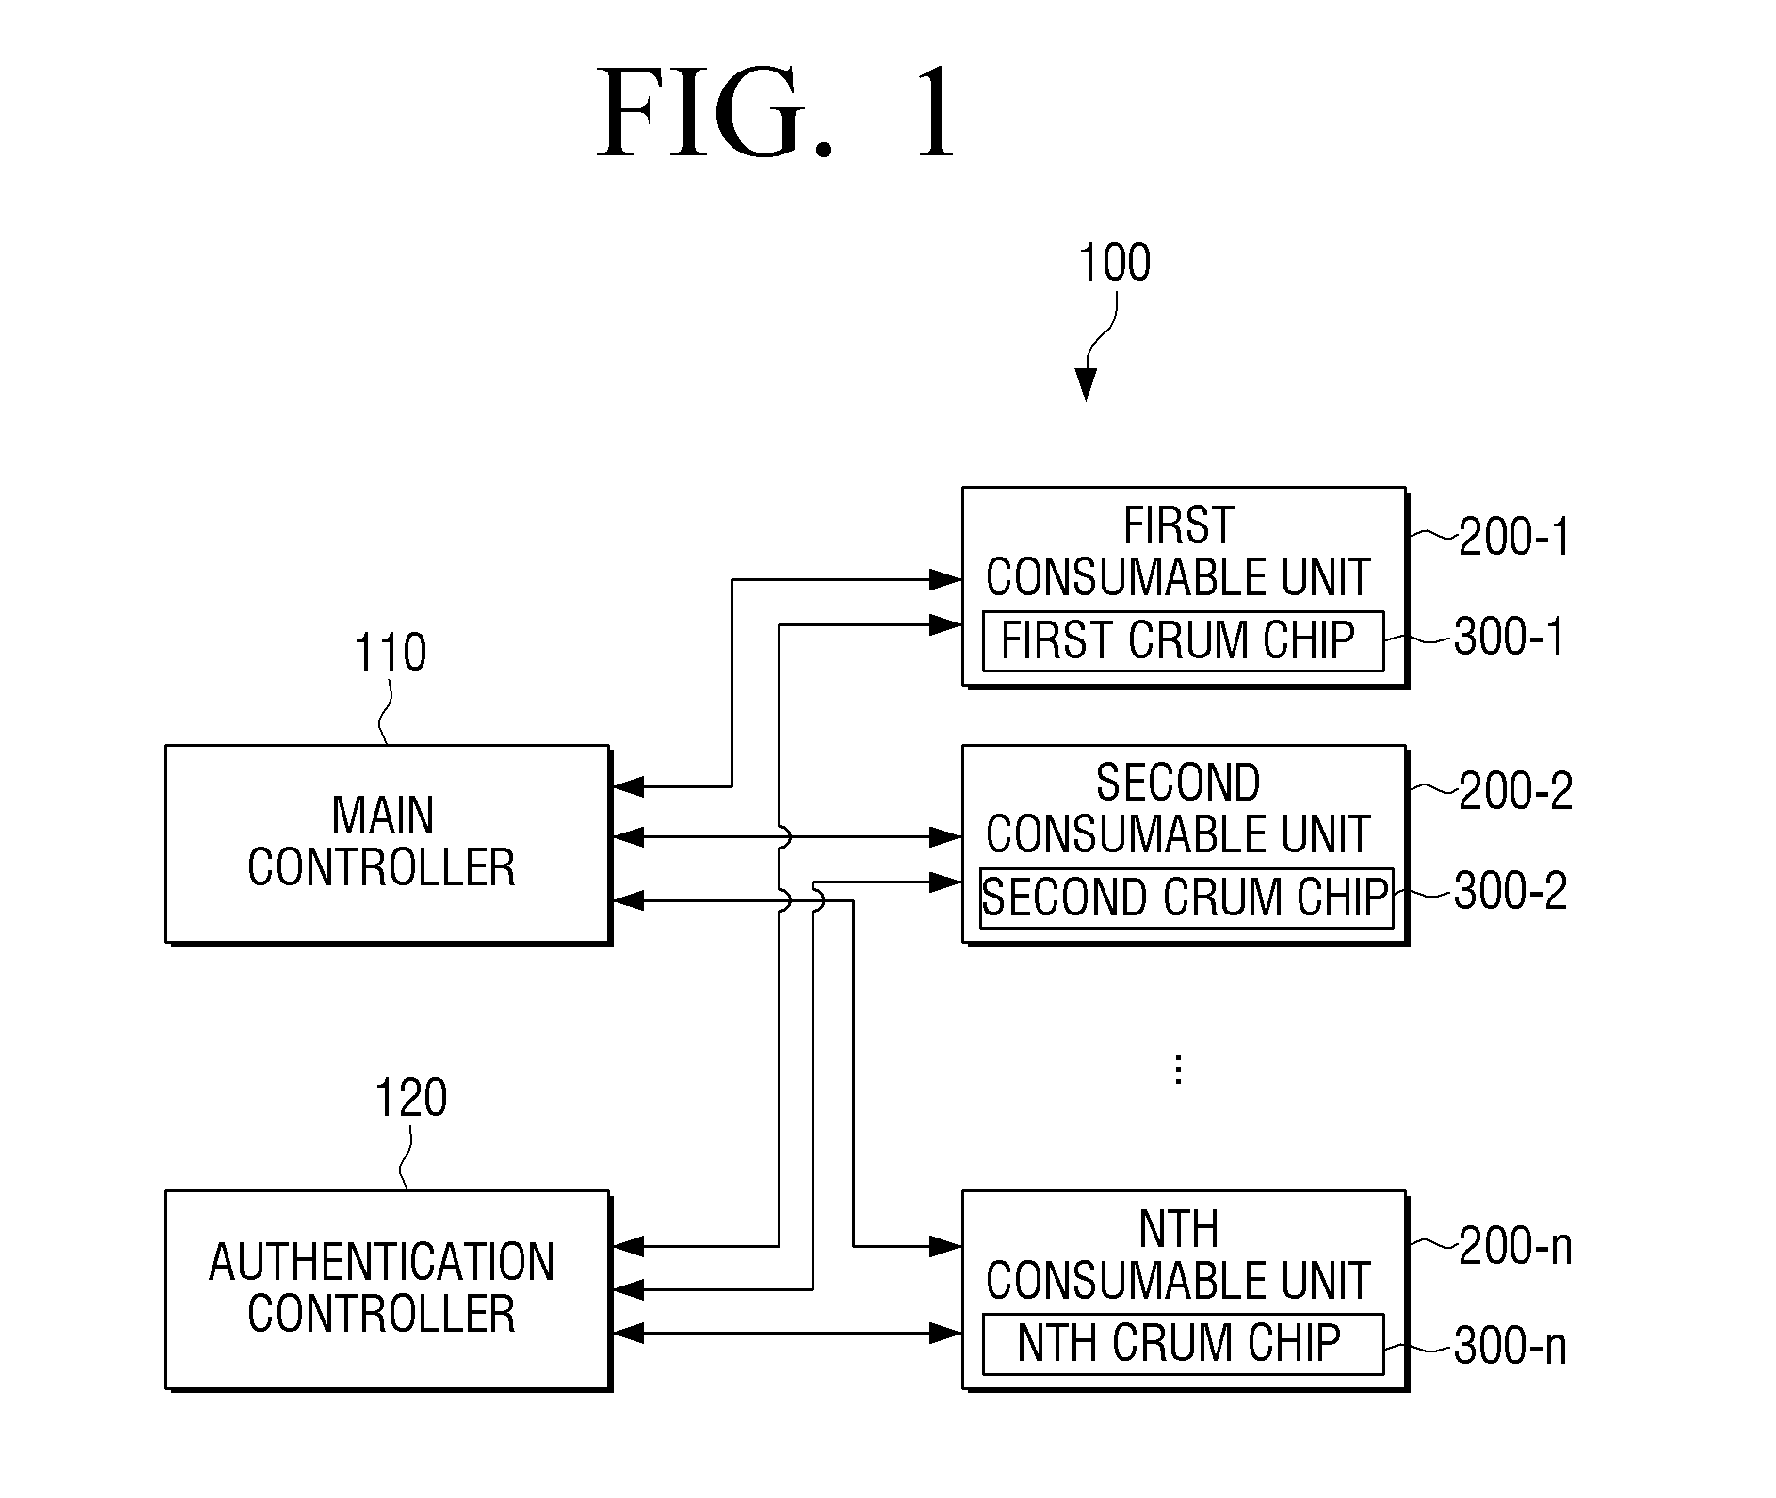 Crum chip mountable in comsumable unit, image forming apparatus for authentificating the crum chip, and method thereof